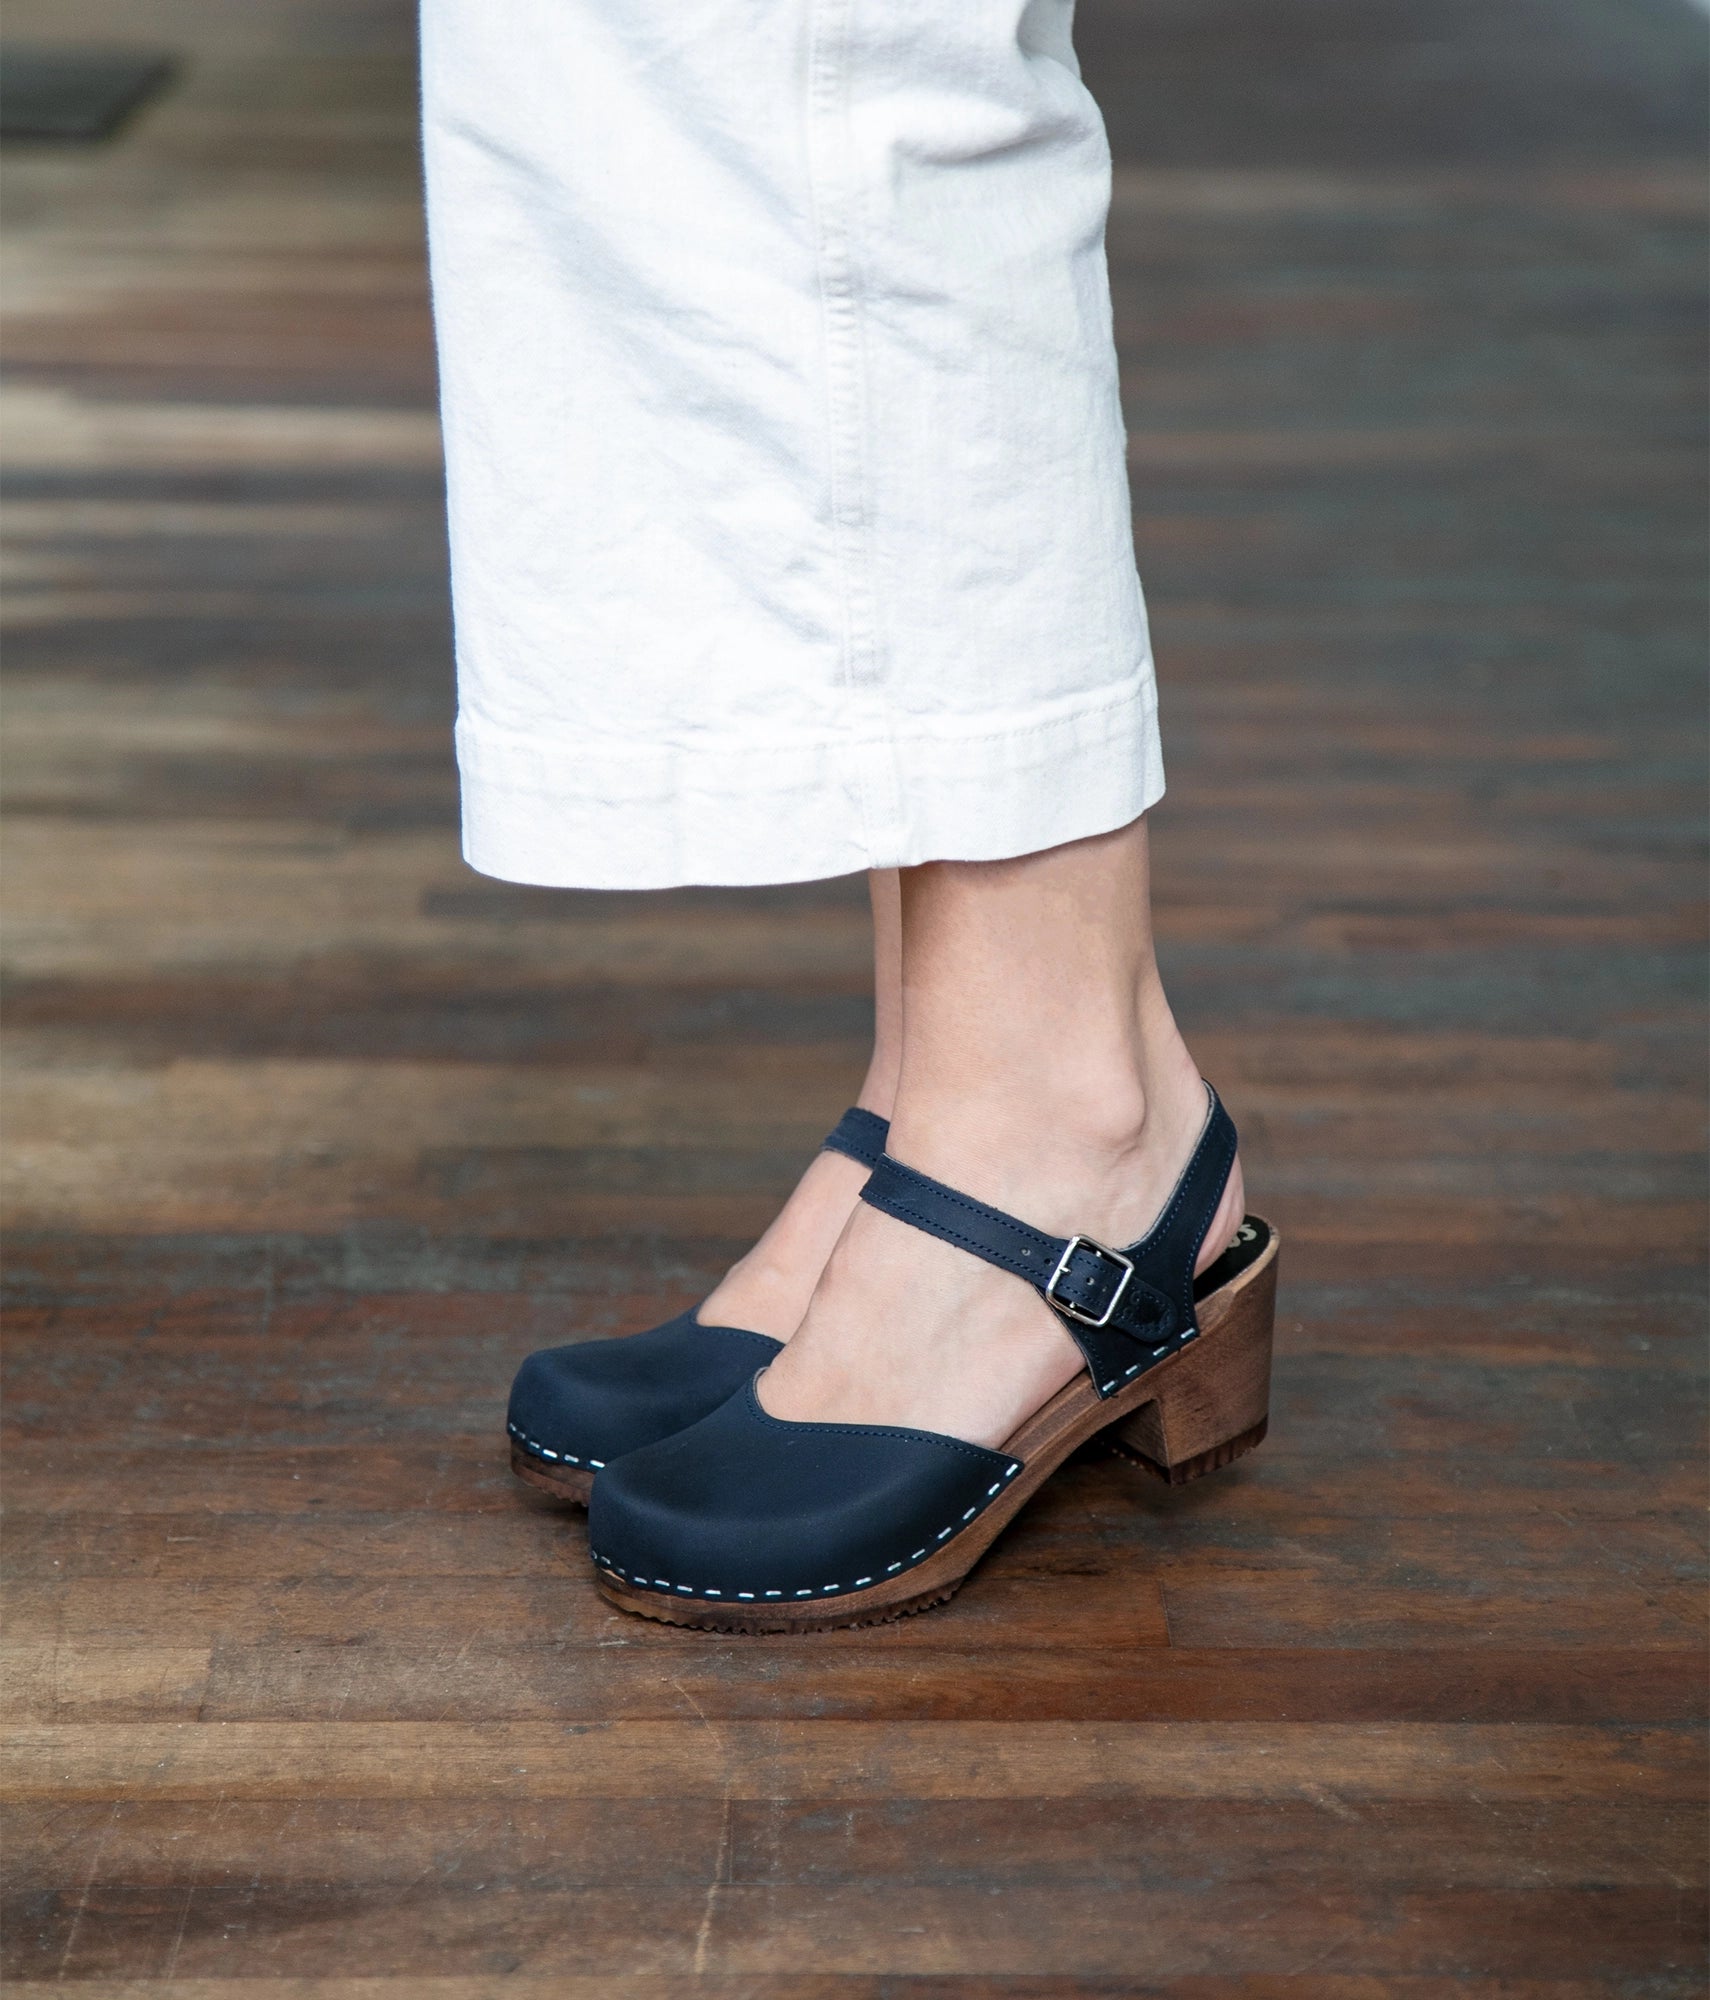 woman wearing white jeans and high heeled closed-toe clog sandal in navy blue nubuck leather stapled on a dark wooden base